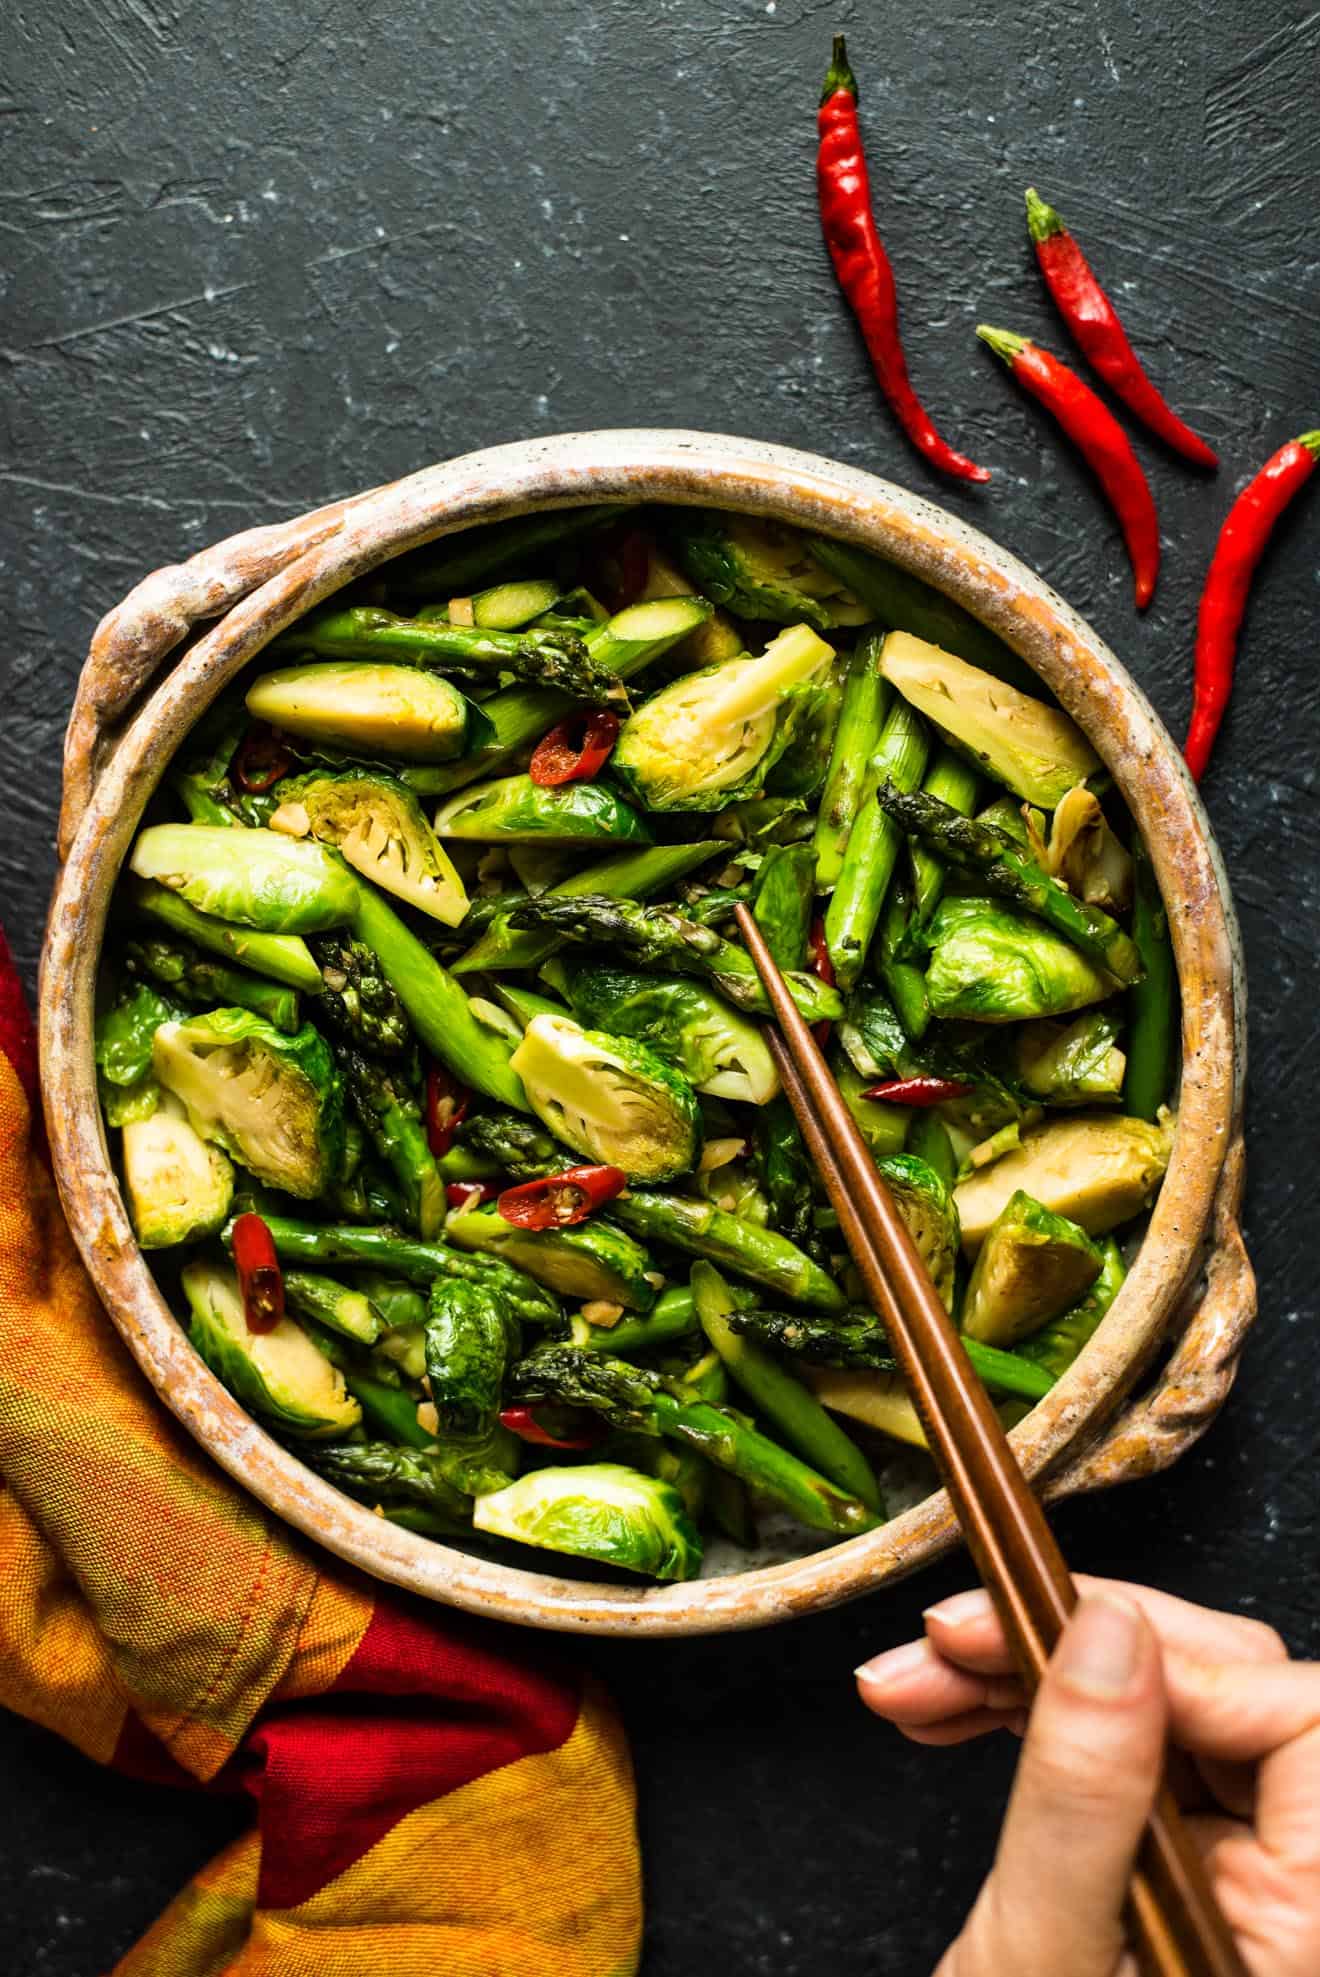 Chili & Garlic Stir-Fried Brussels Sprouts with Asparagus - a quick and easy side dish that's ready in 20 minutes!